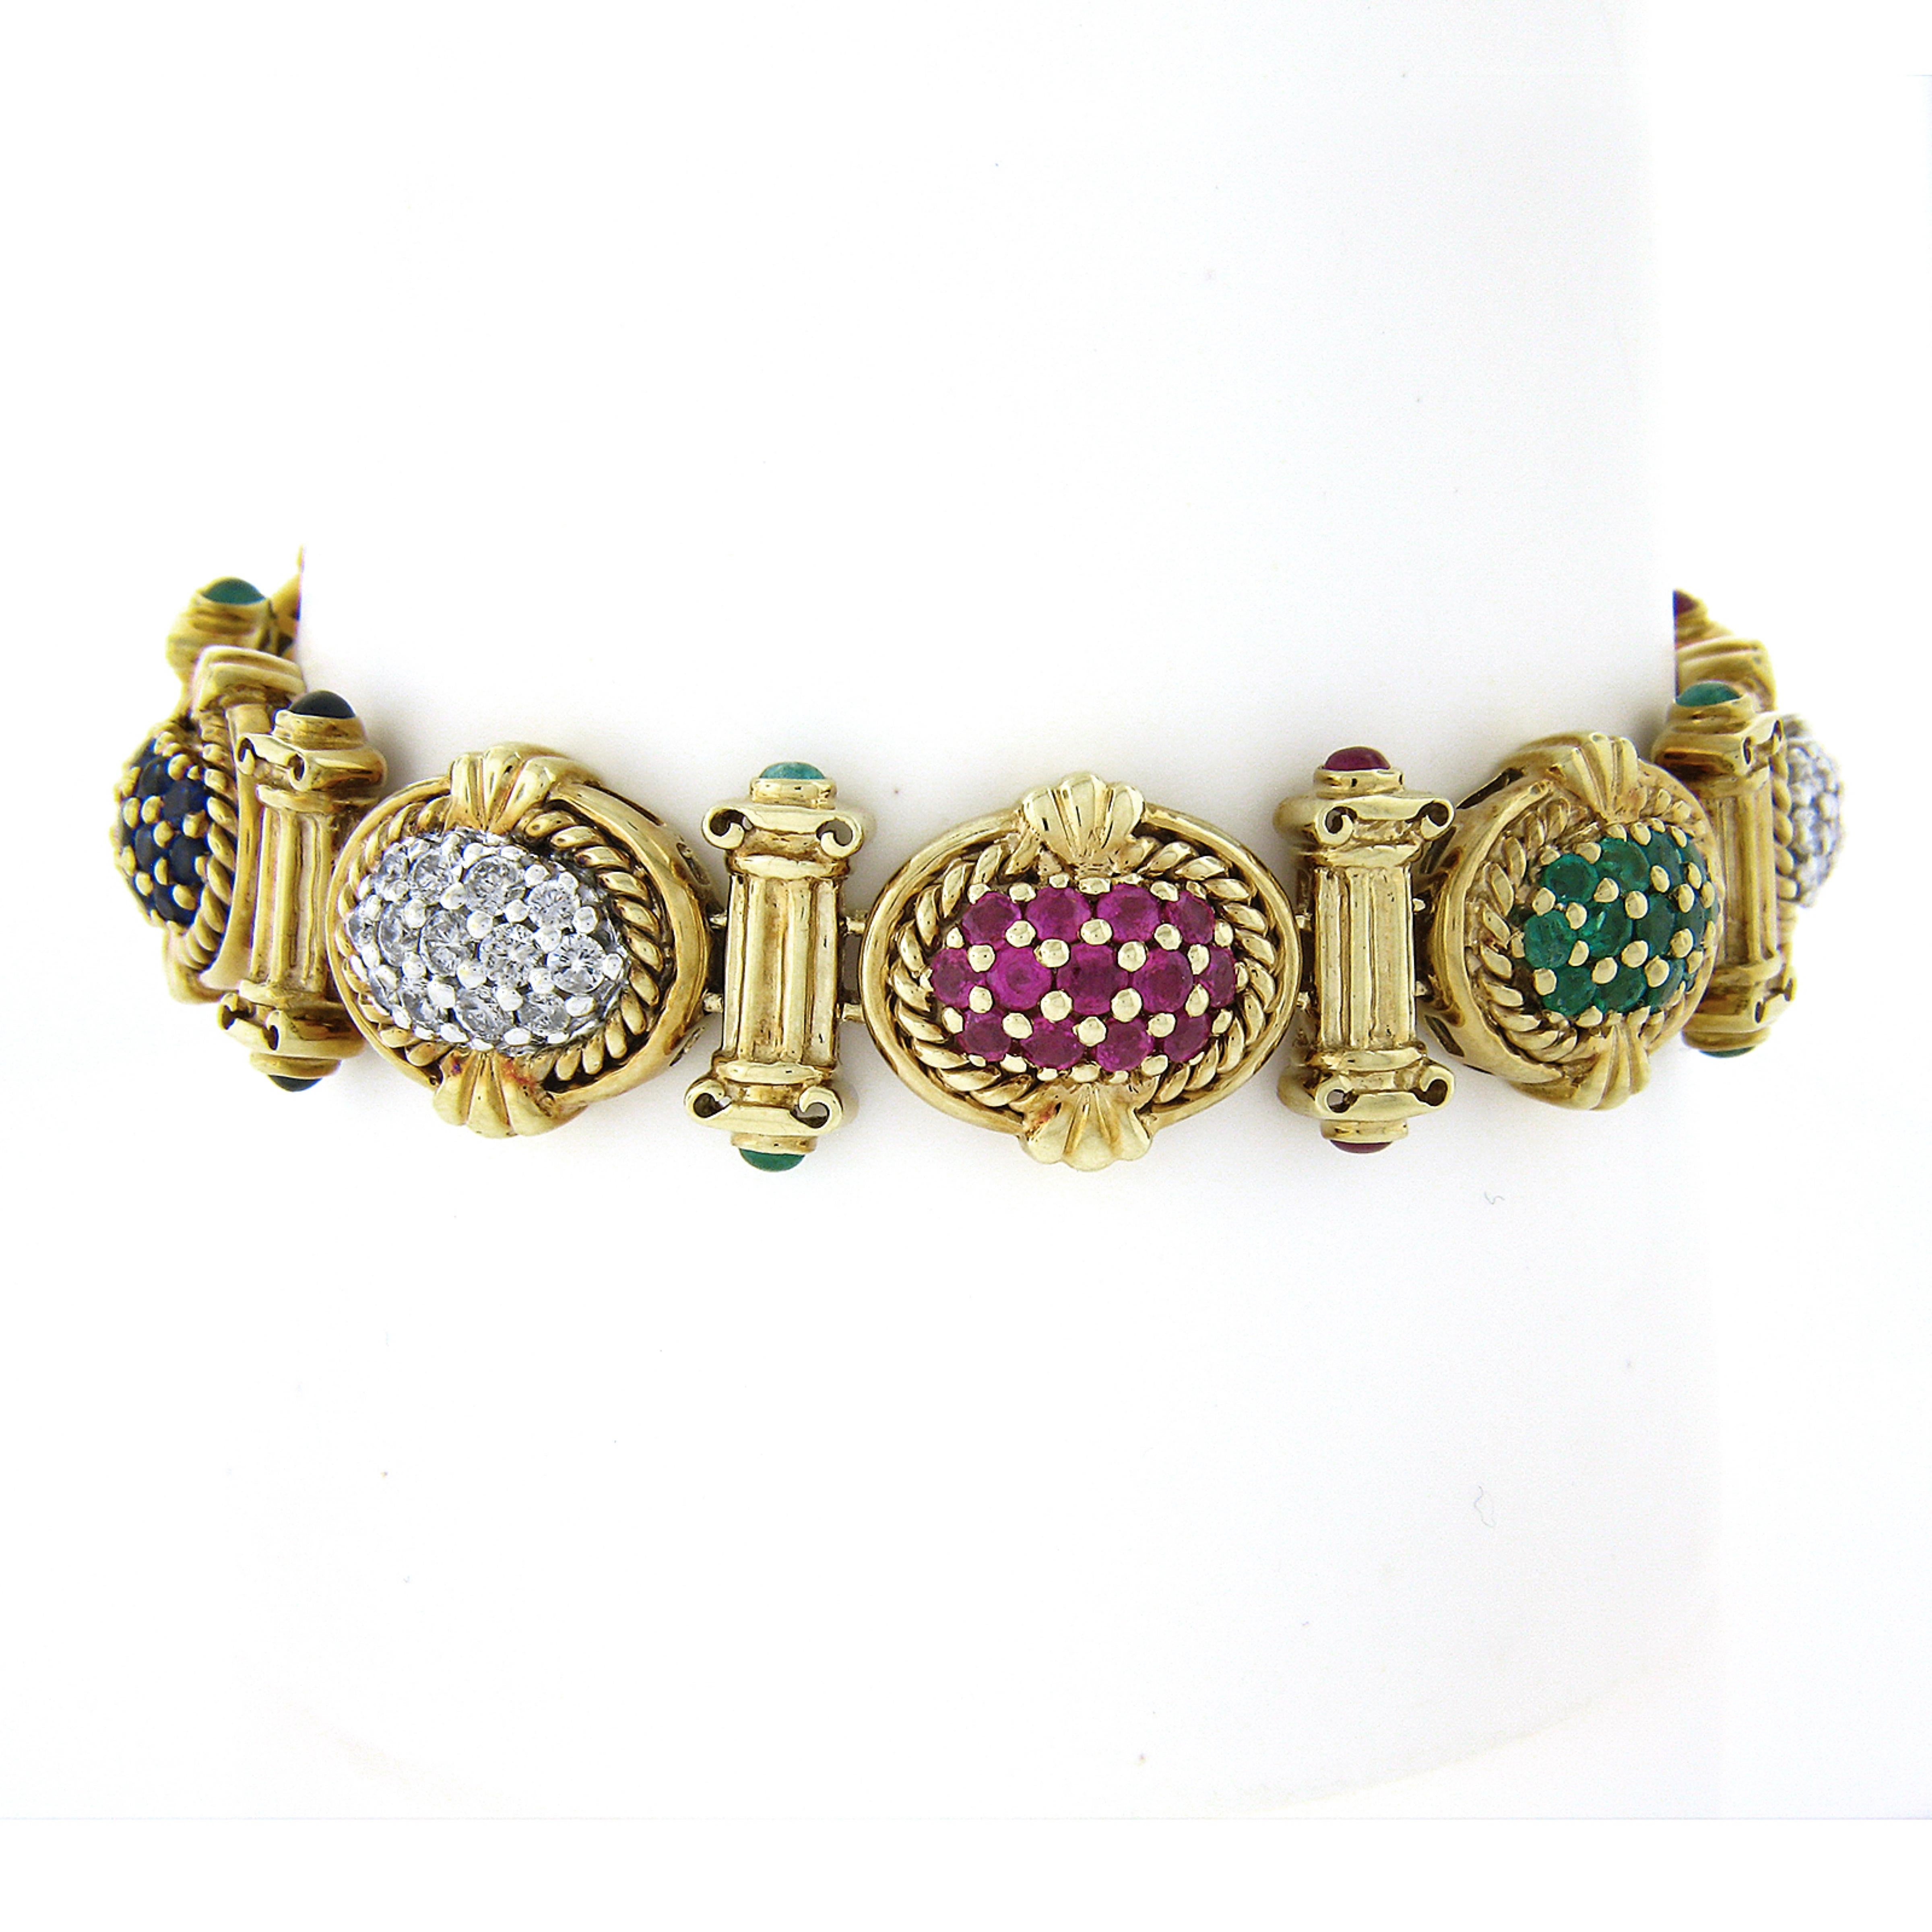 This gorgeous vintage bracelet was crafted in solid 14k yellow gold and features very unique and detailed oval links that are decorated with gold twisted wire and adorned with top quality sapphires, rubies, emeralds and diamonds. The oval links are